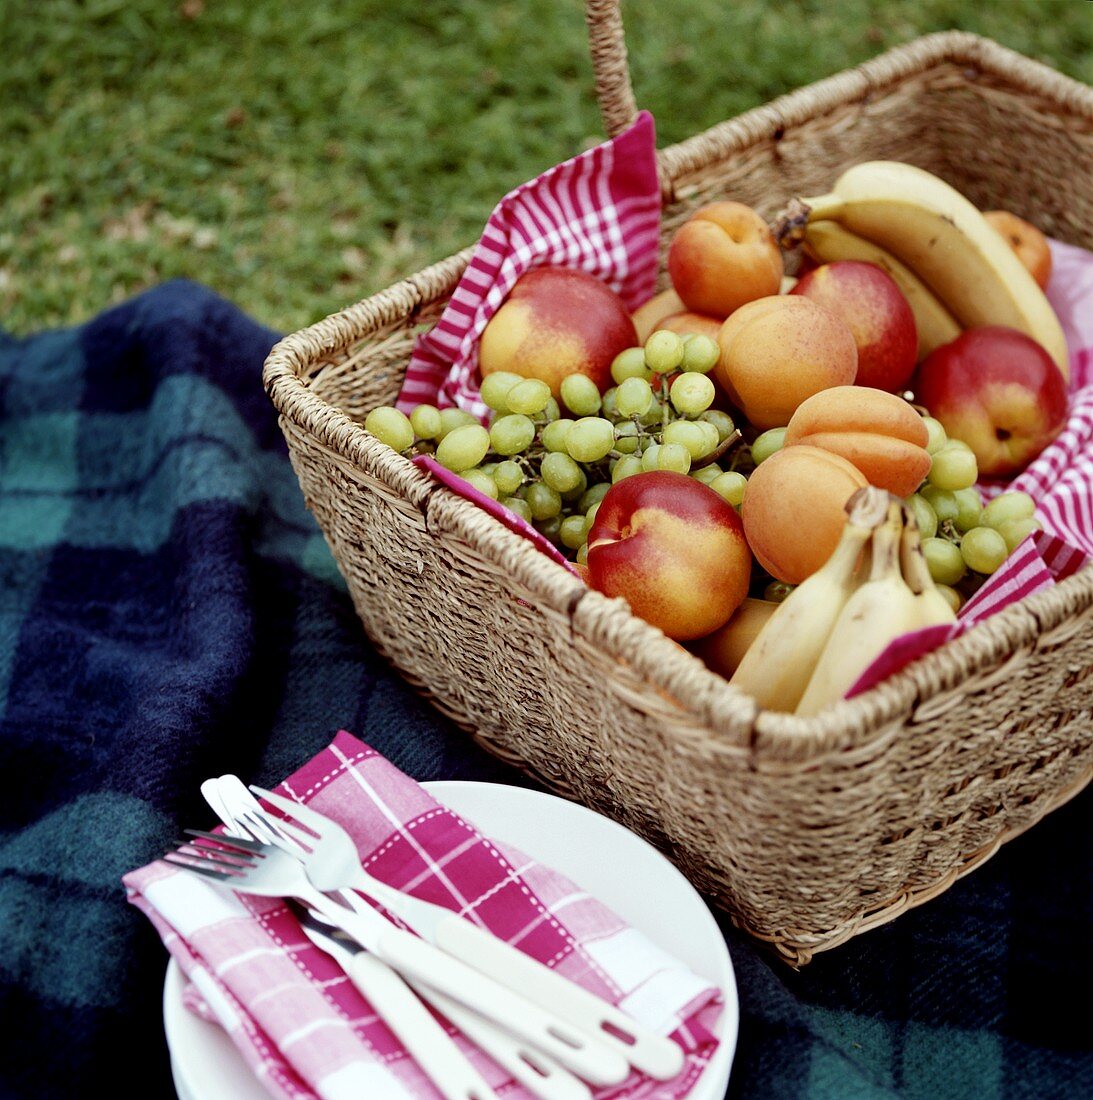 Picnic with basket of fruit